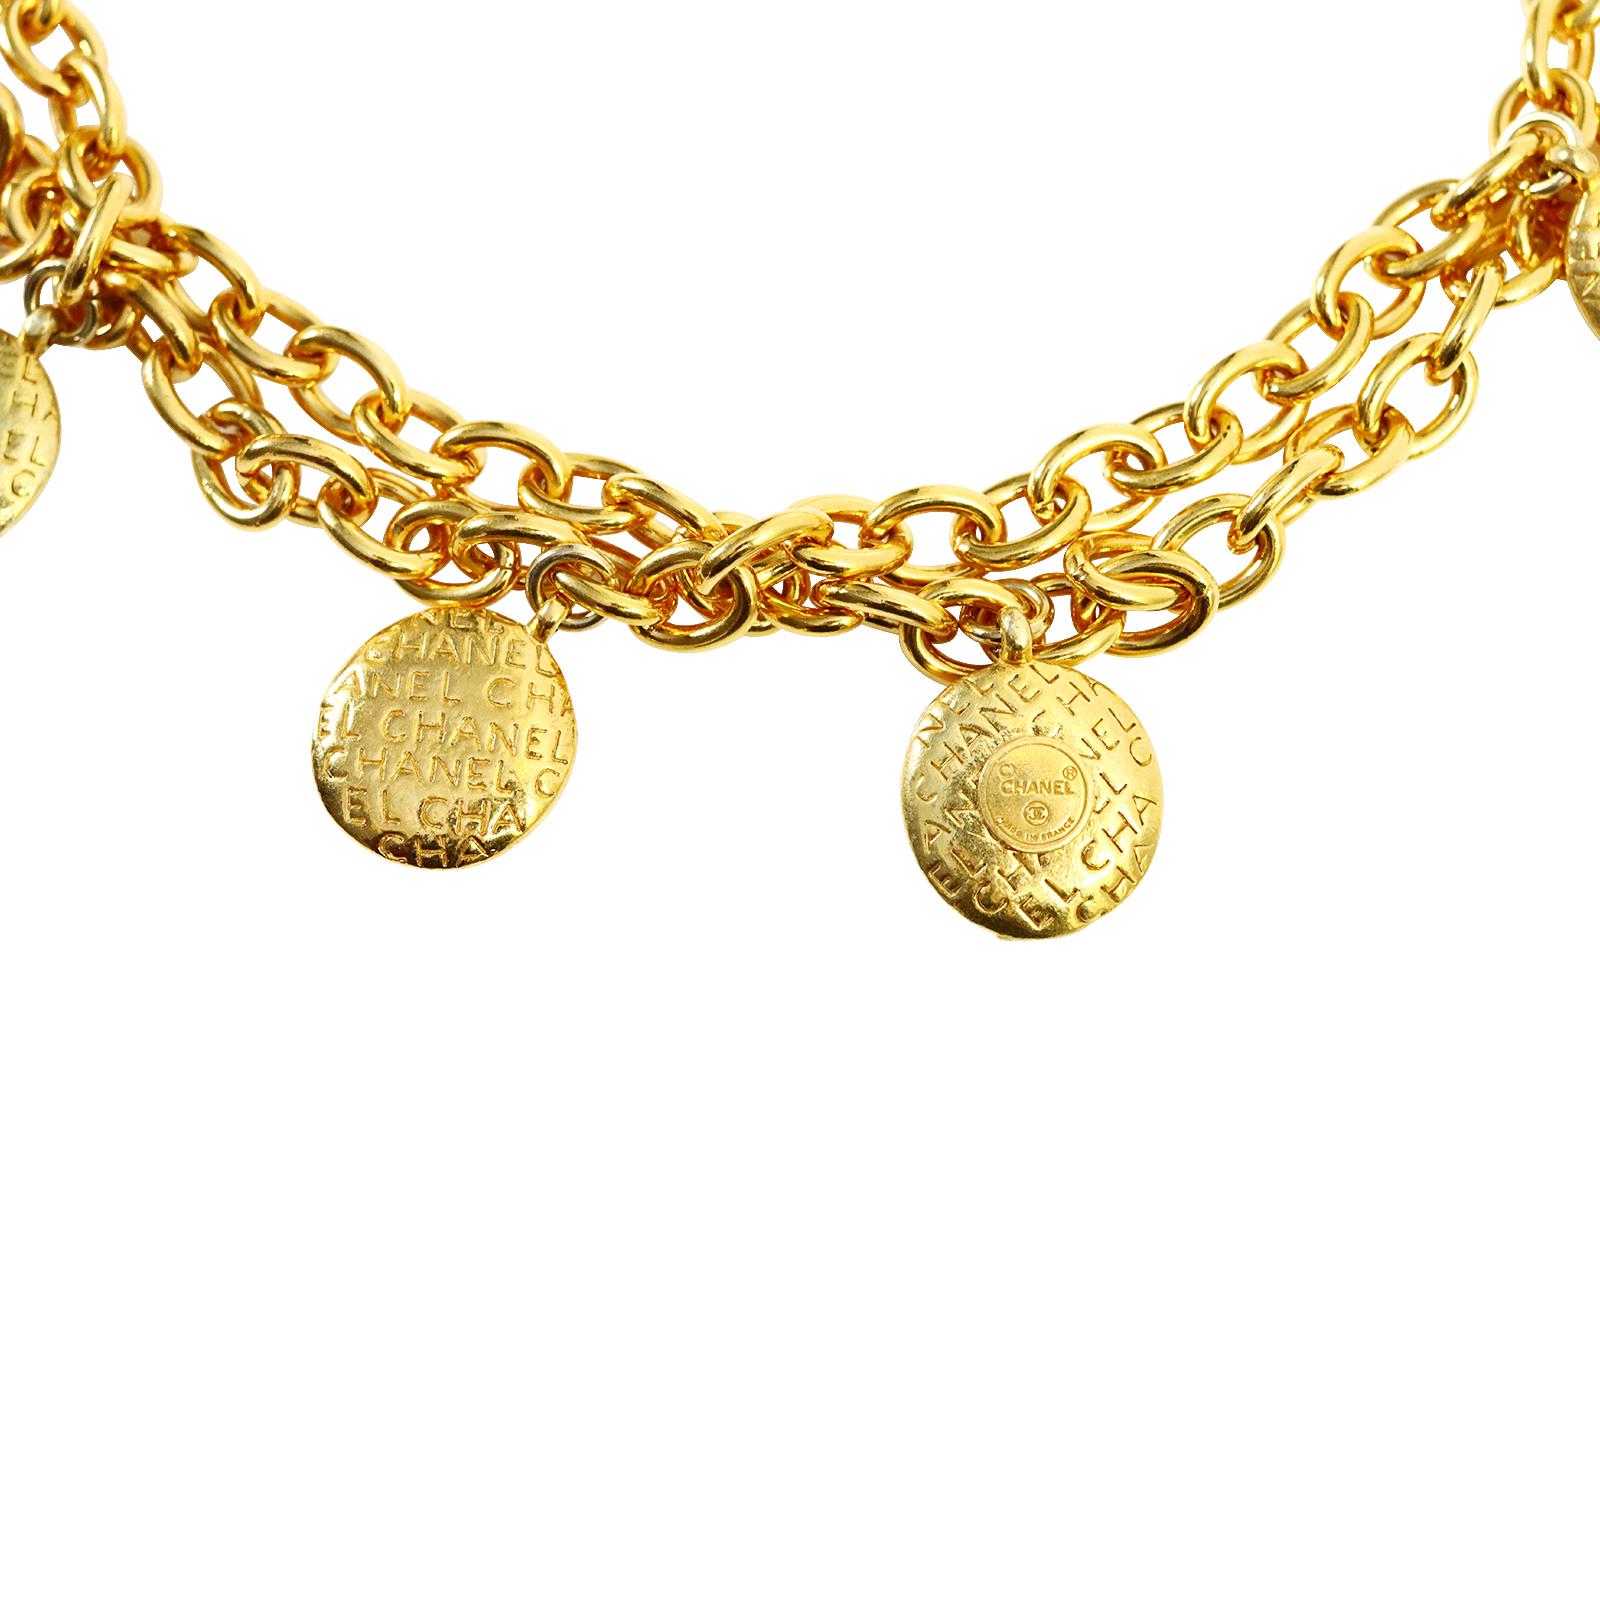 Vintage Chanel Gold Disc Chanel and Coco on Long Necklace Circa 1980s For Sale 10